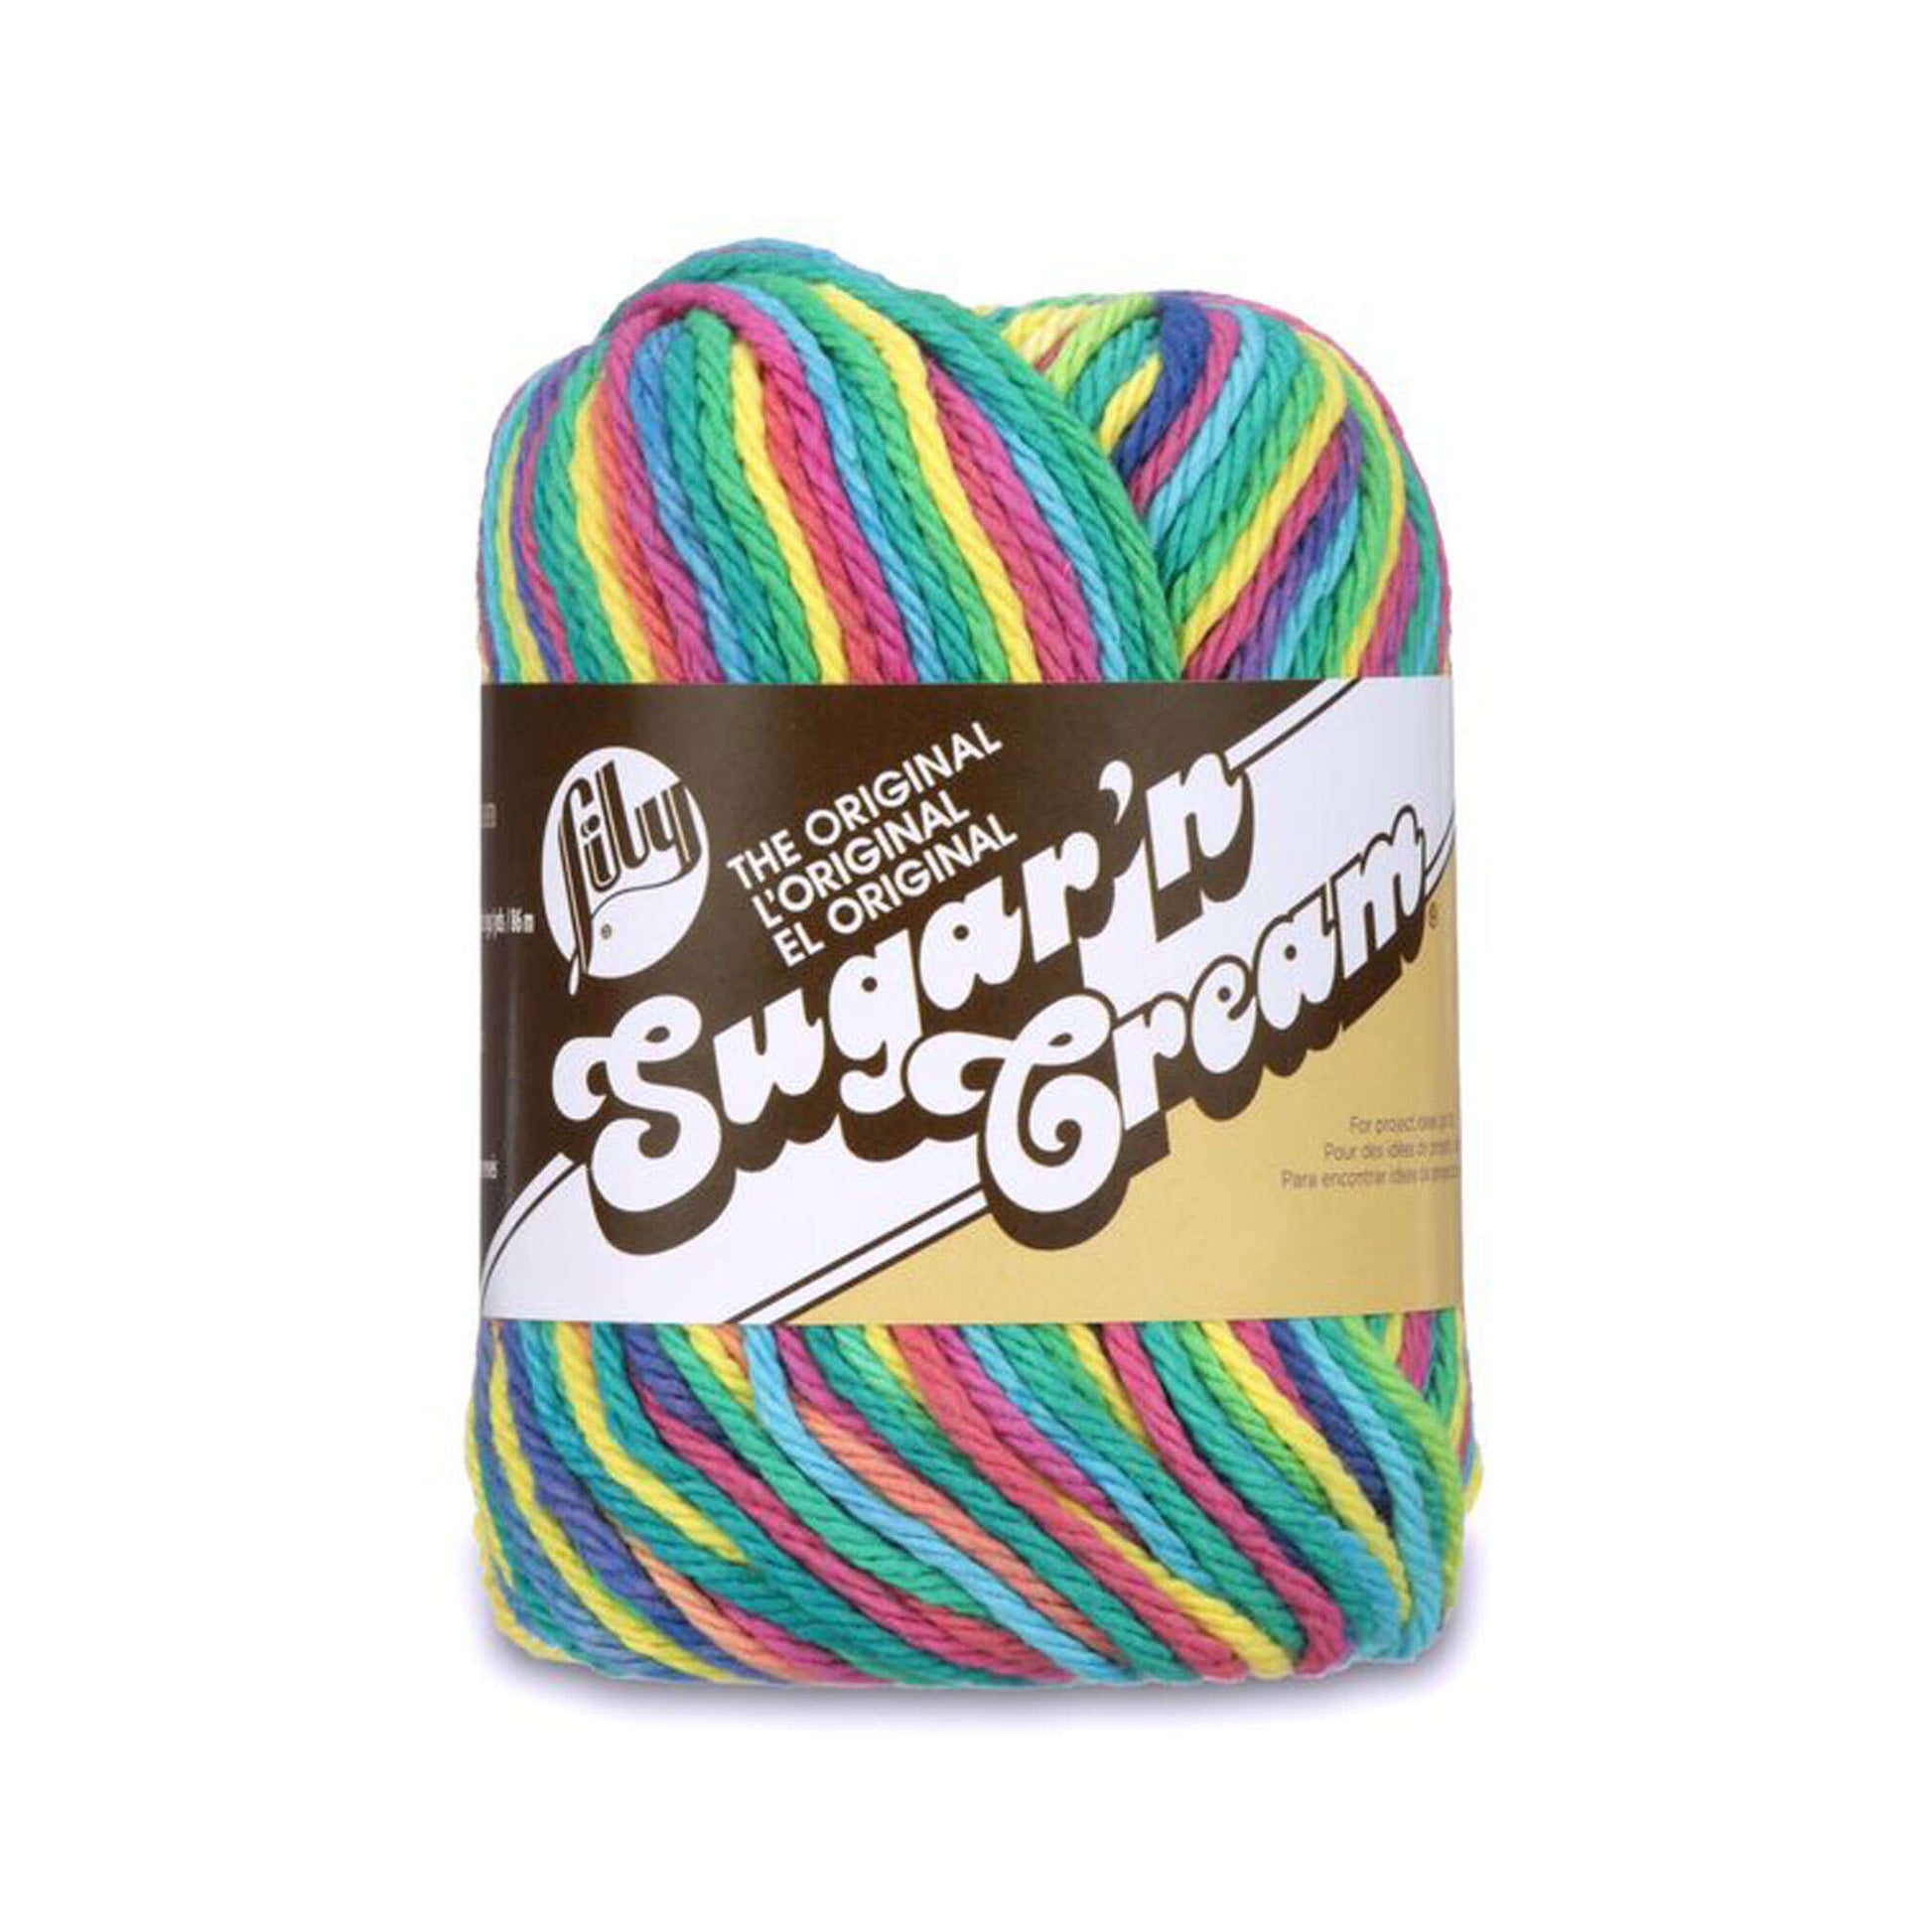 Lily Sugar'n Cream Ombres Yarn Psychedelic Ombre